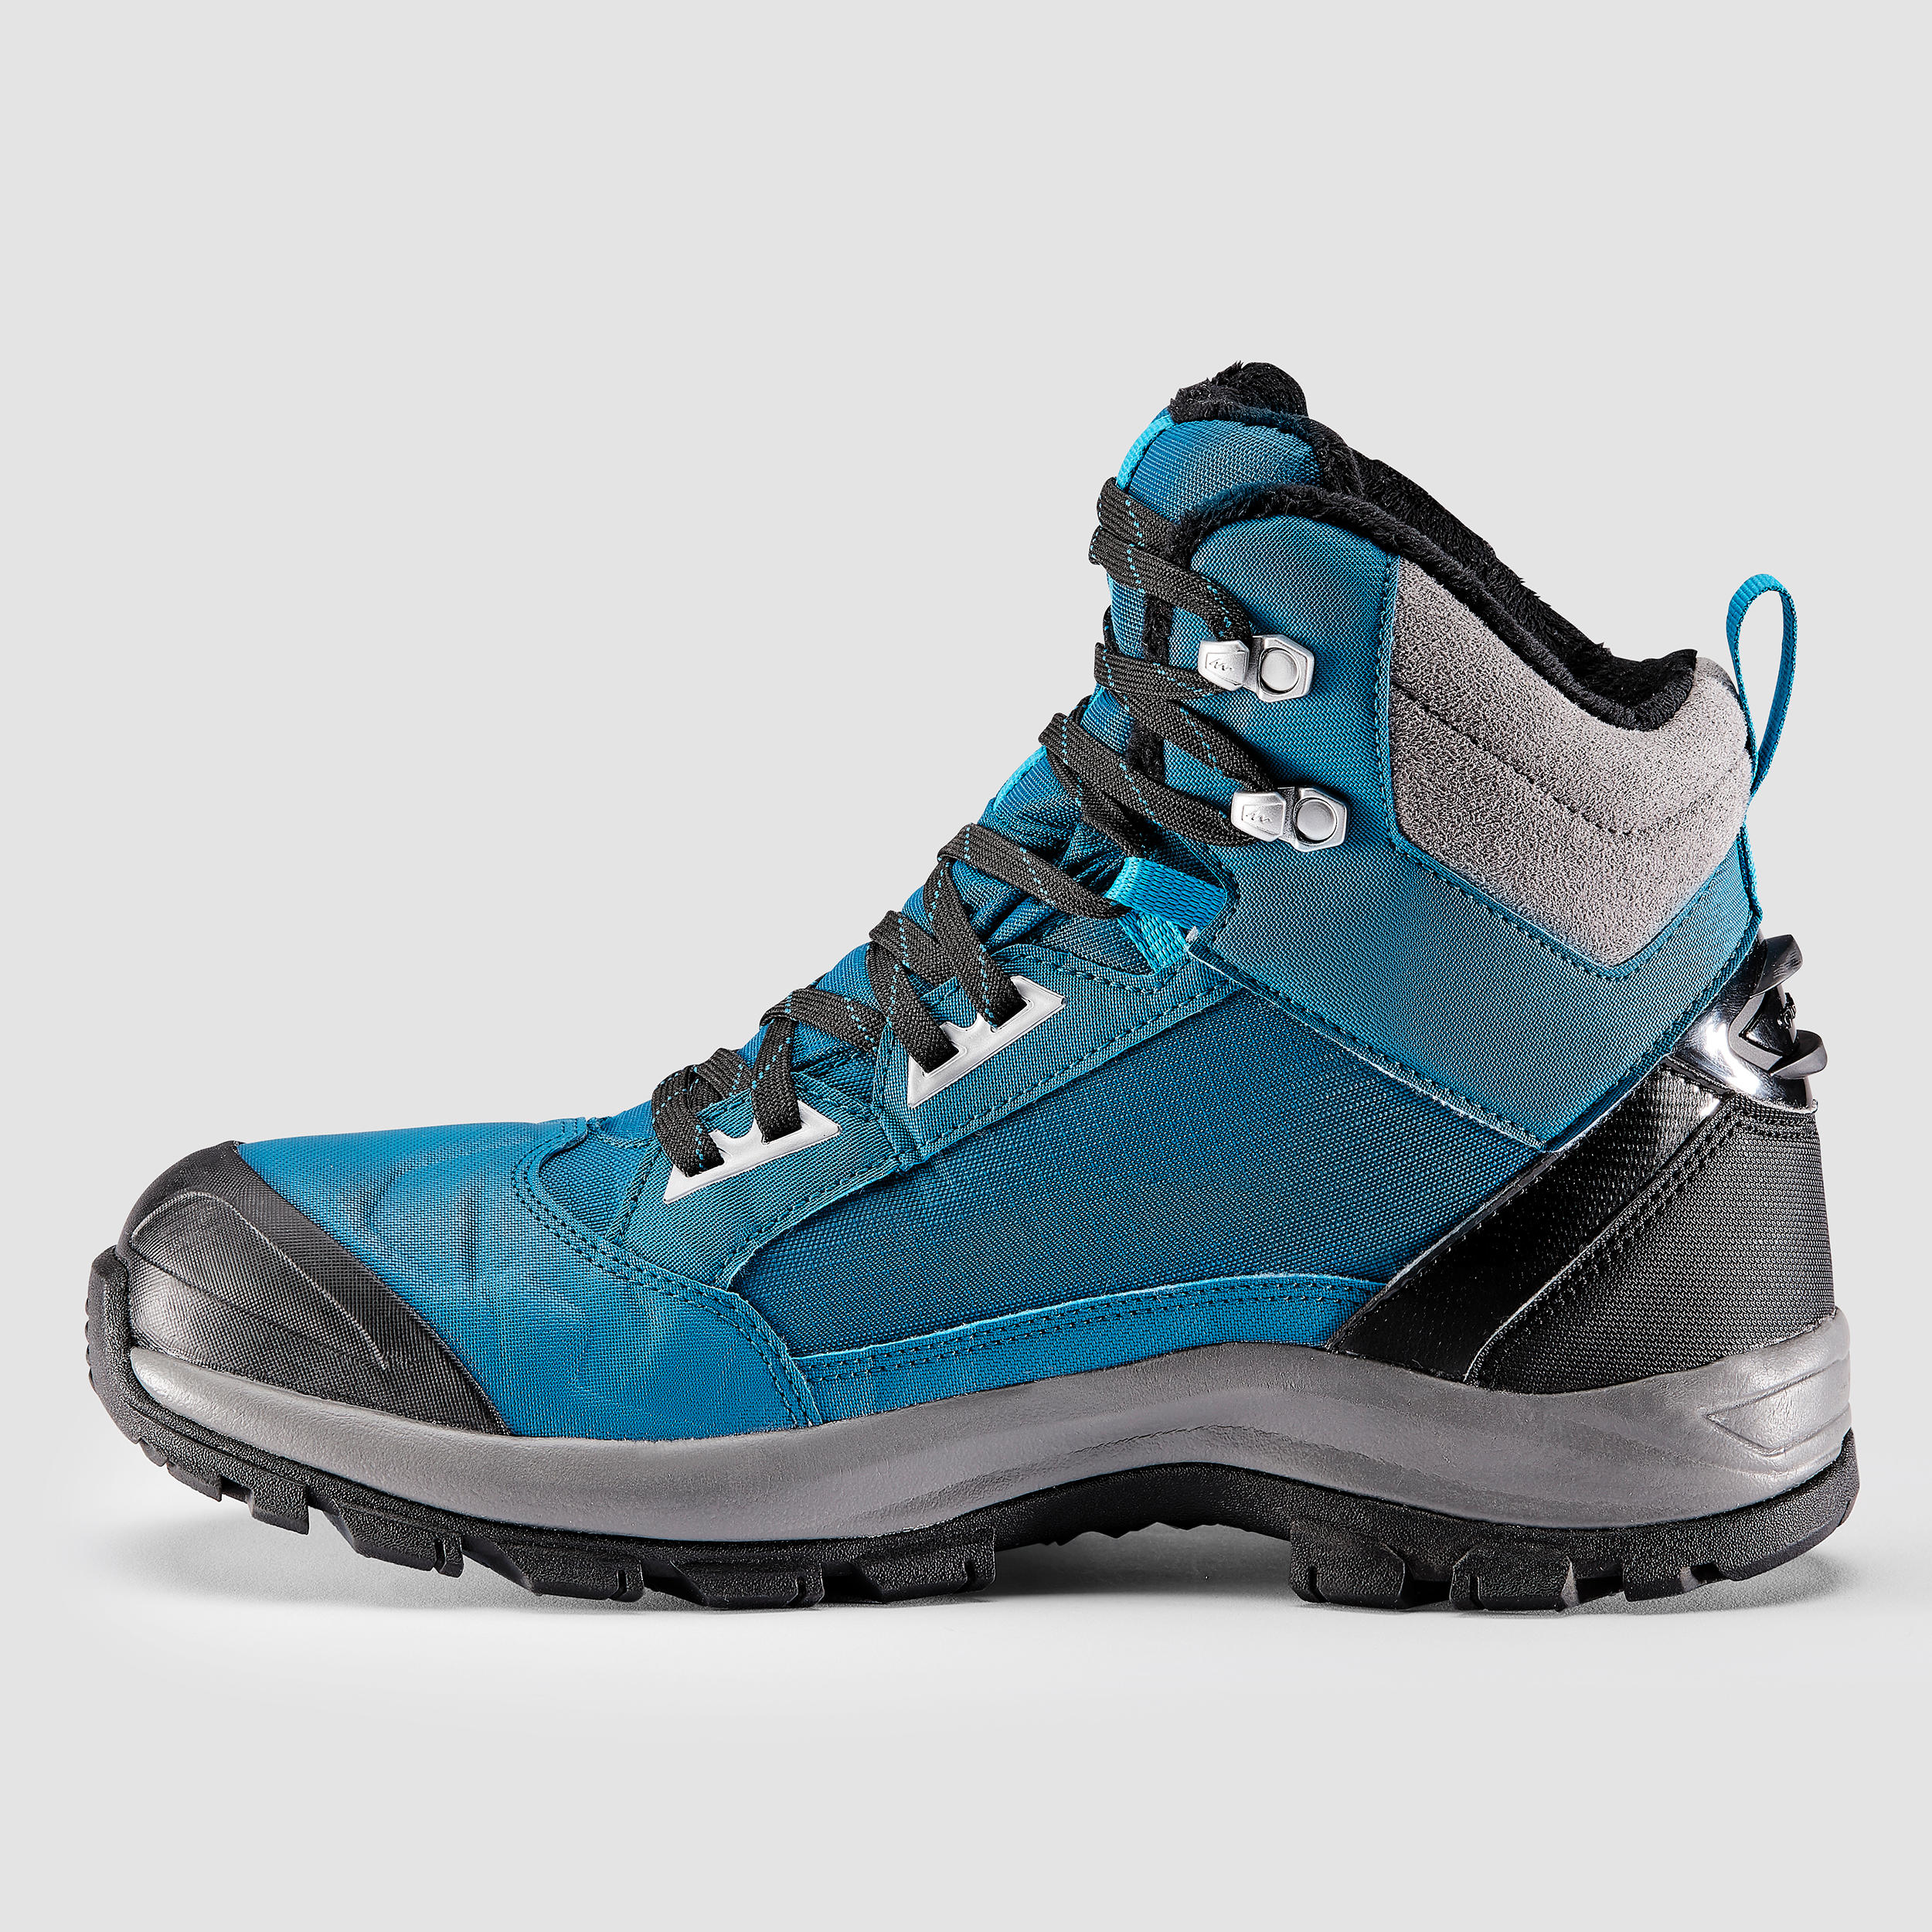 Men’s Warm and Waterproof Hiking Boots - SH500 mountain MID 3/8